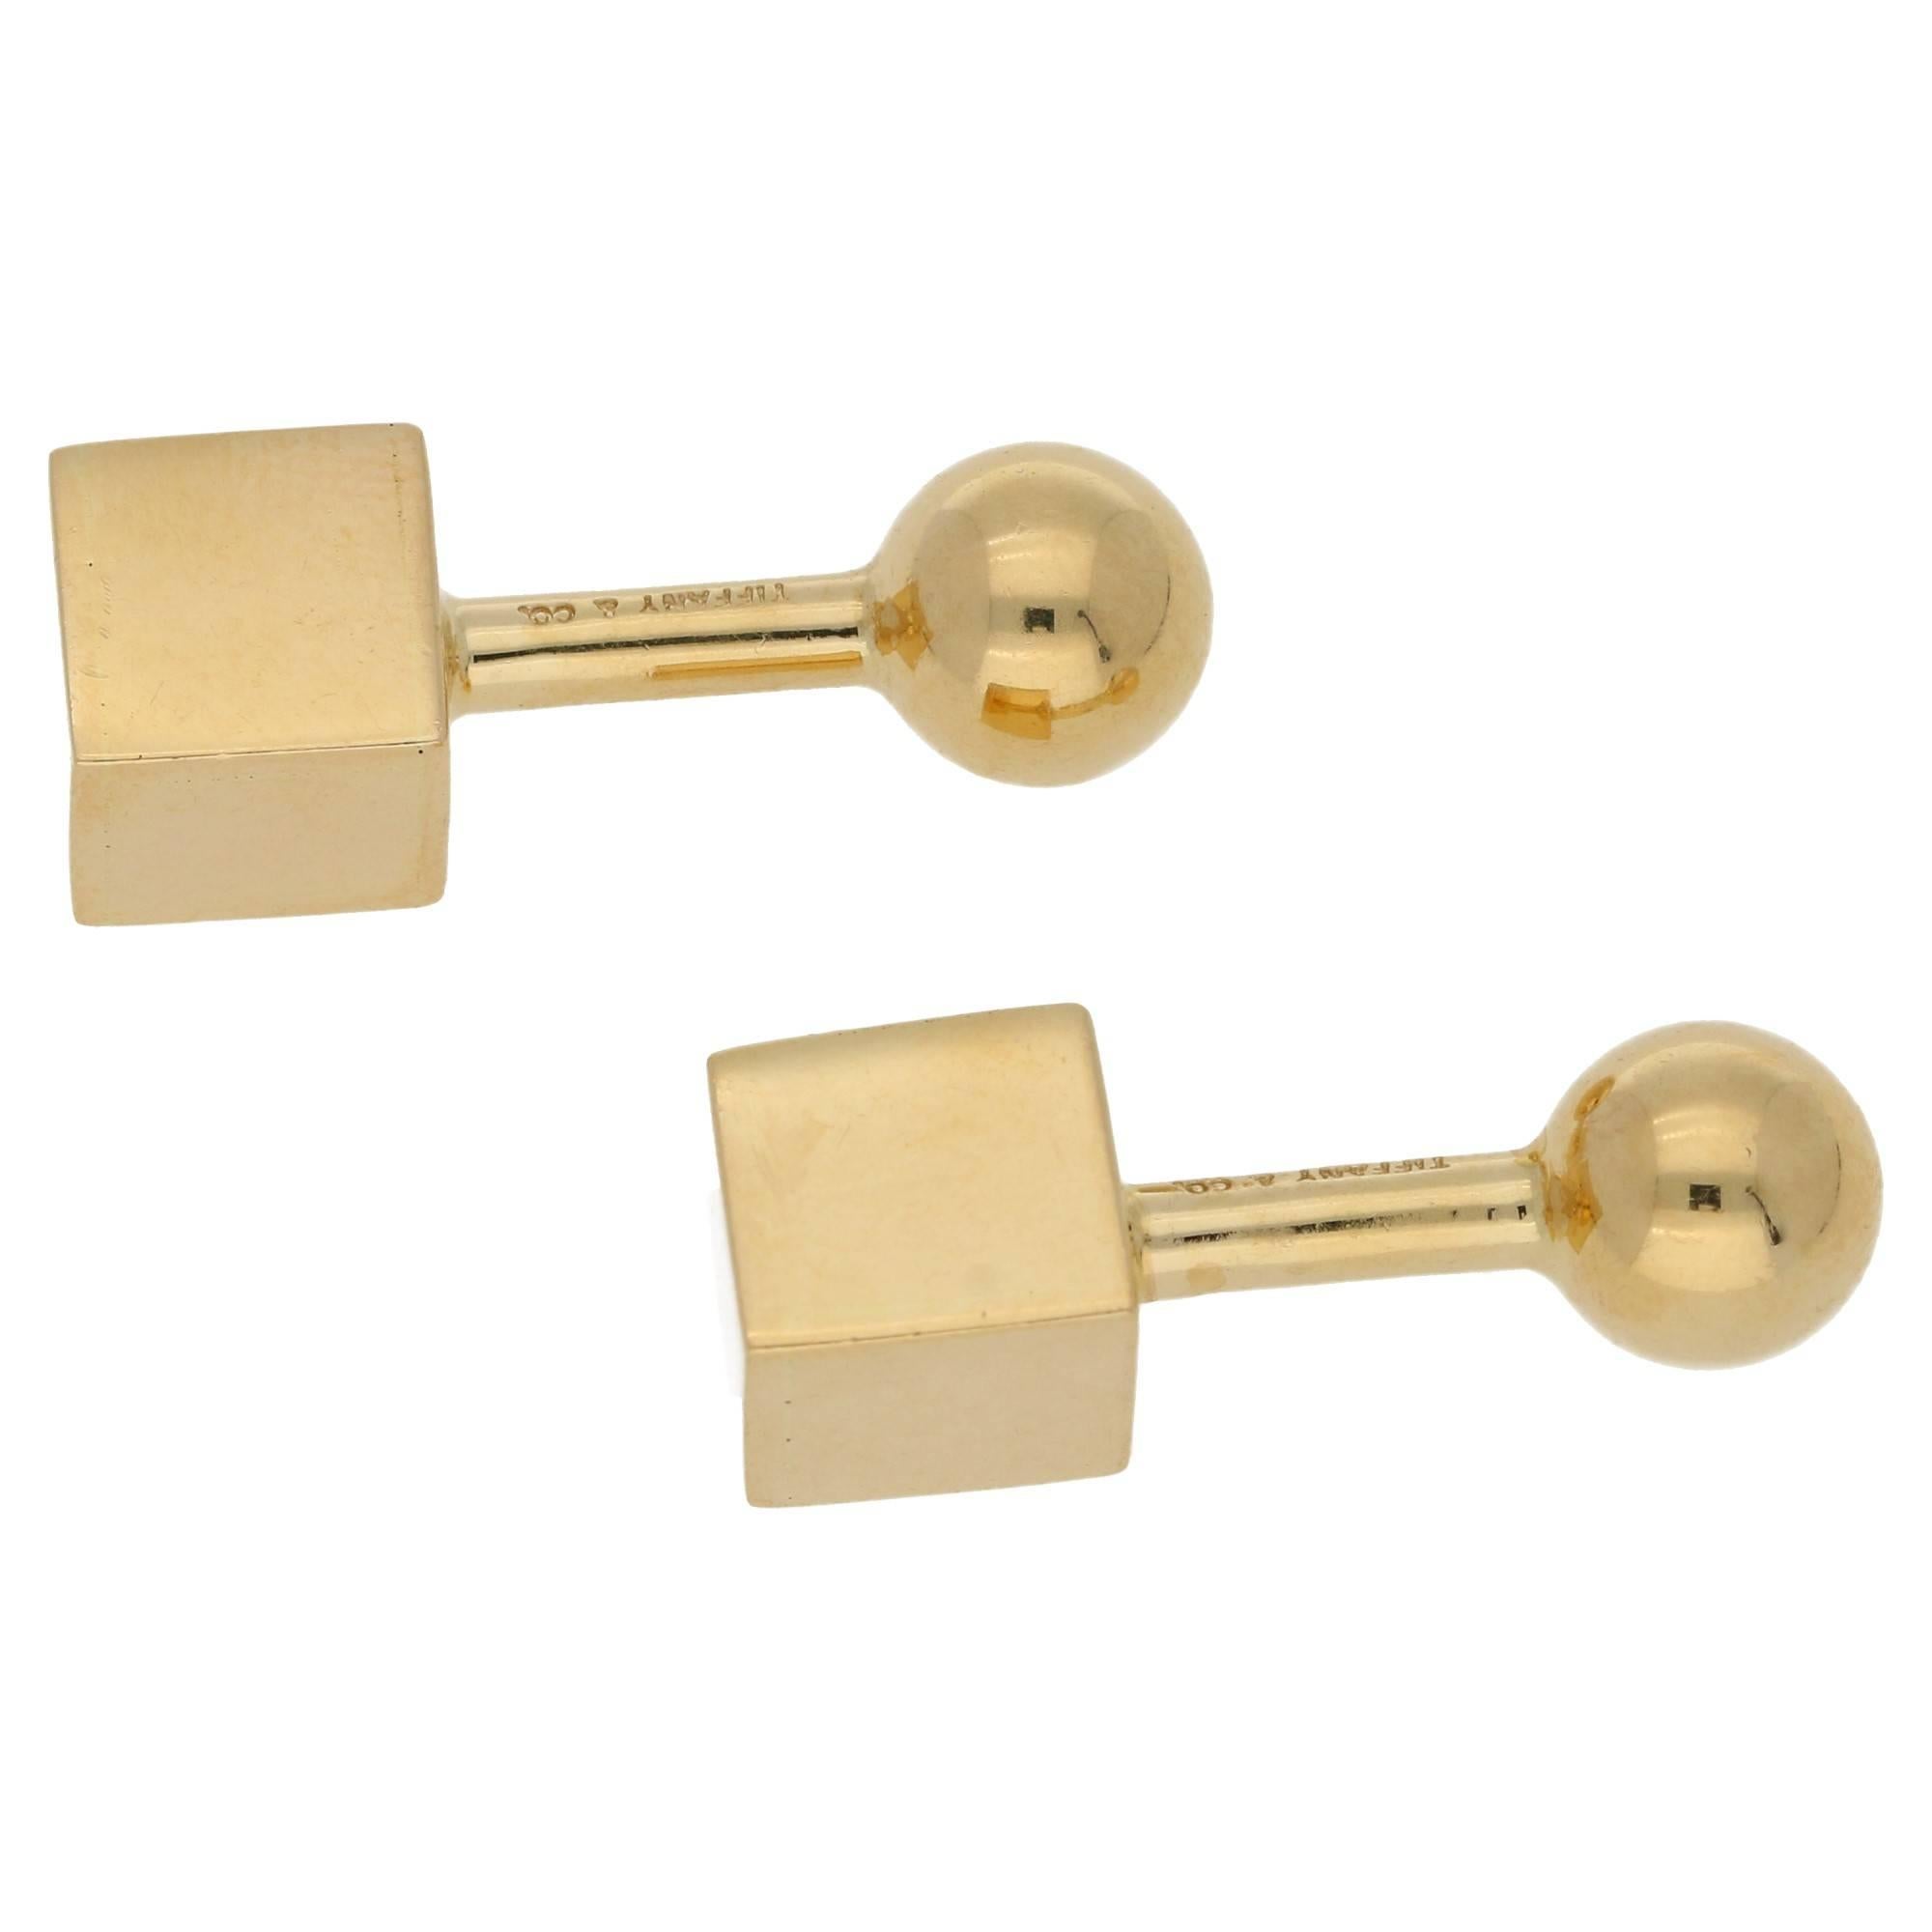 A very unusual pair of late 1960's Tiffany and Co. cube and ball cufflinks made from 14k yellow gold. Fully hallmarked, Tiffany and Co. 585.